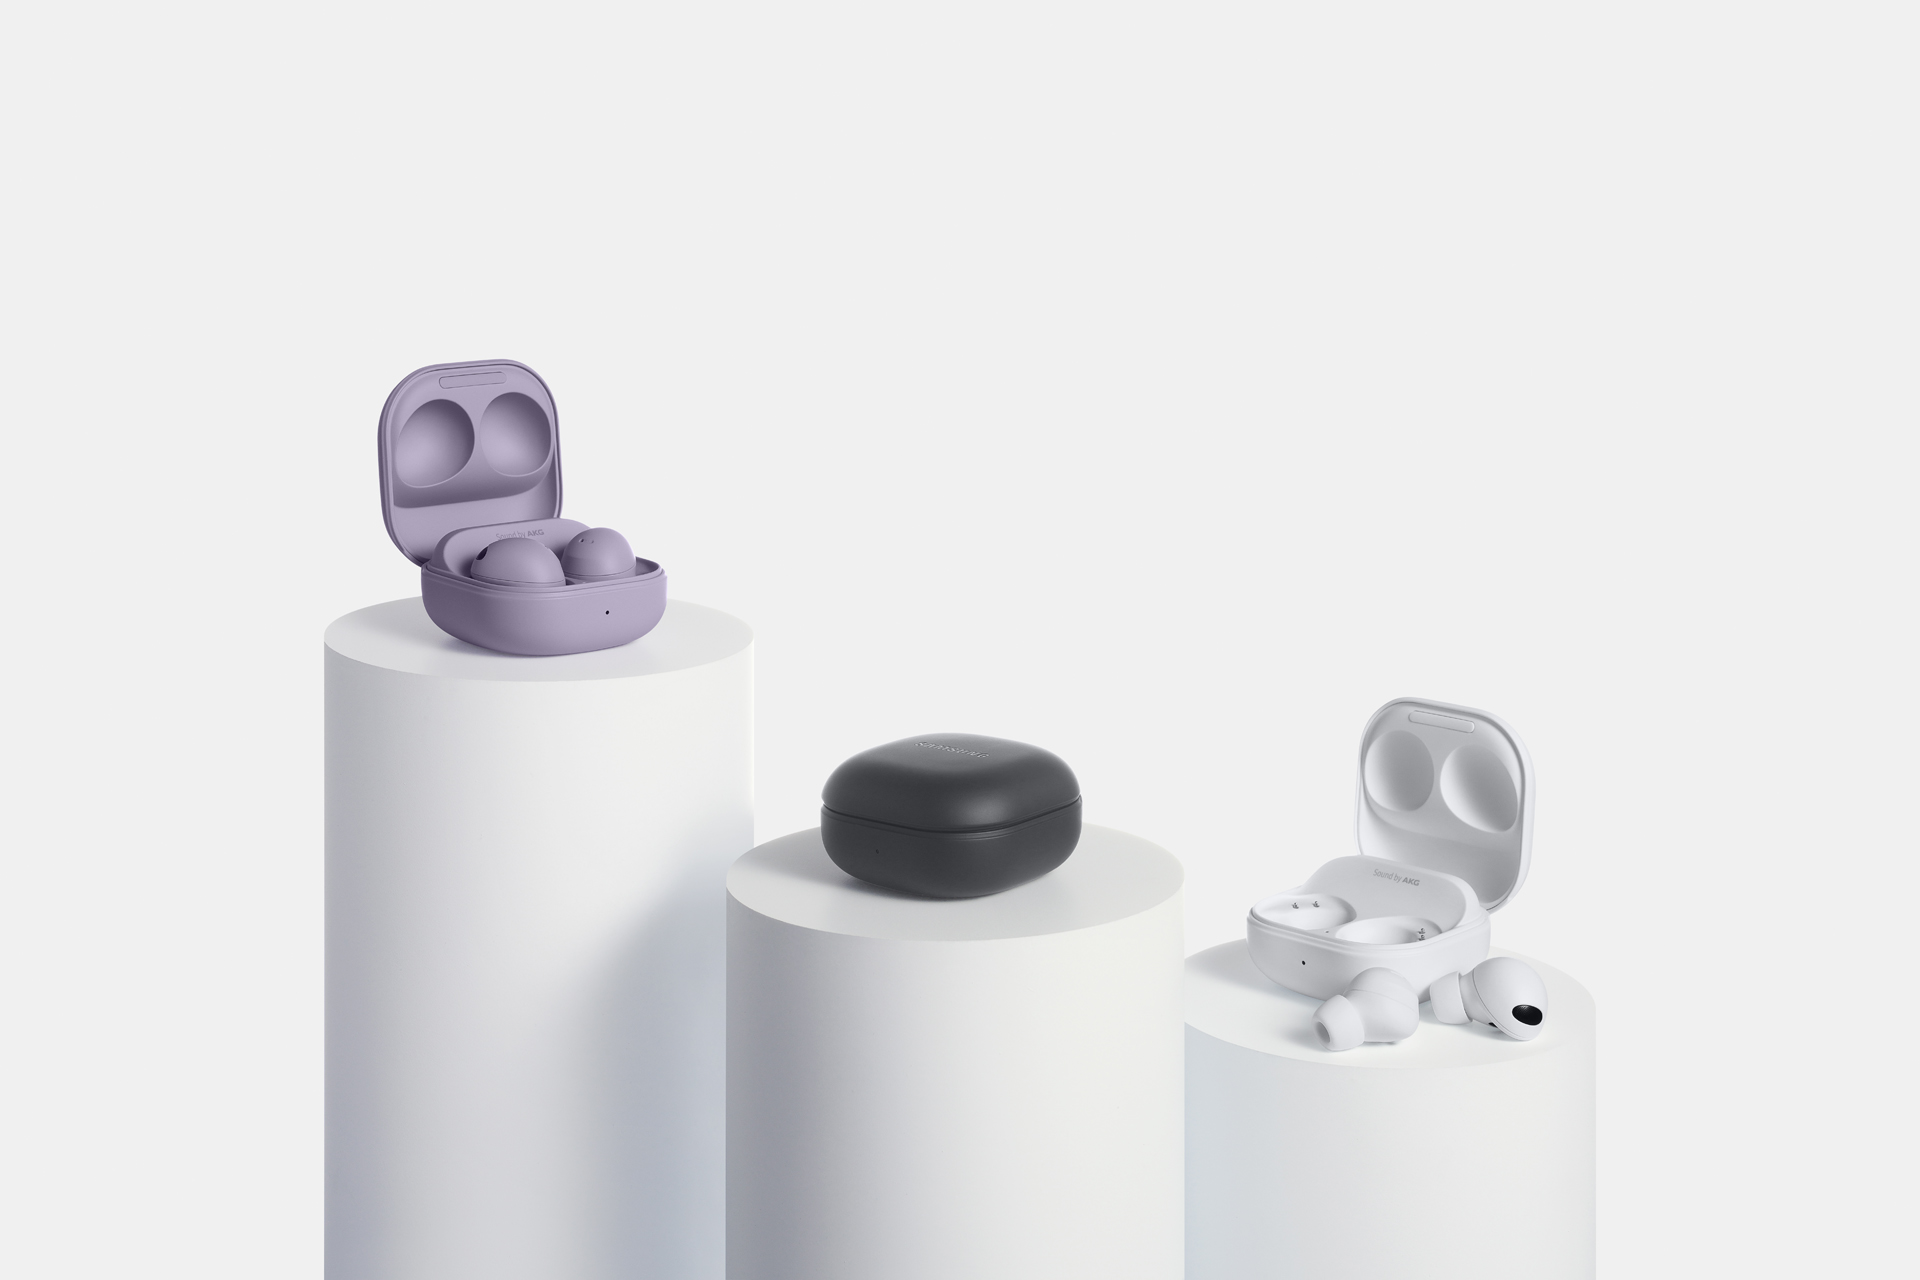 Samsung Galaxy Buds 2 Pro: TWS headphones with improved sound quality, noise cancellation and up to 29 hours of battery life for $230